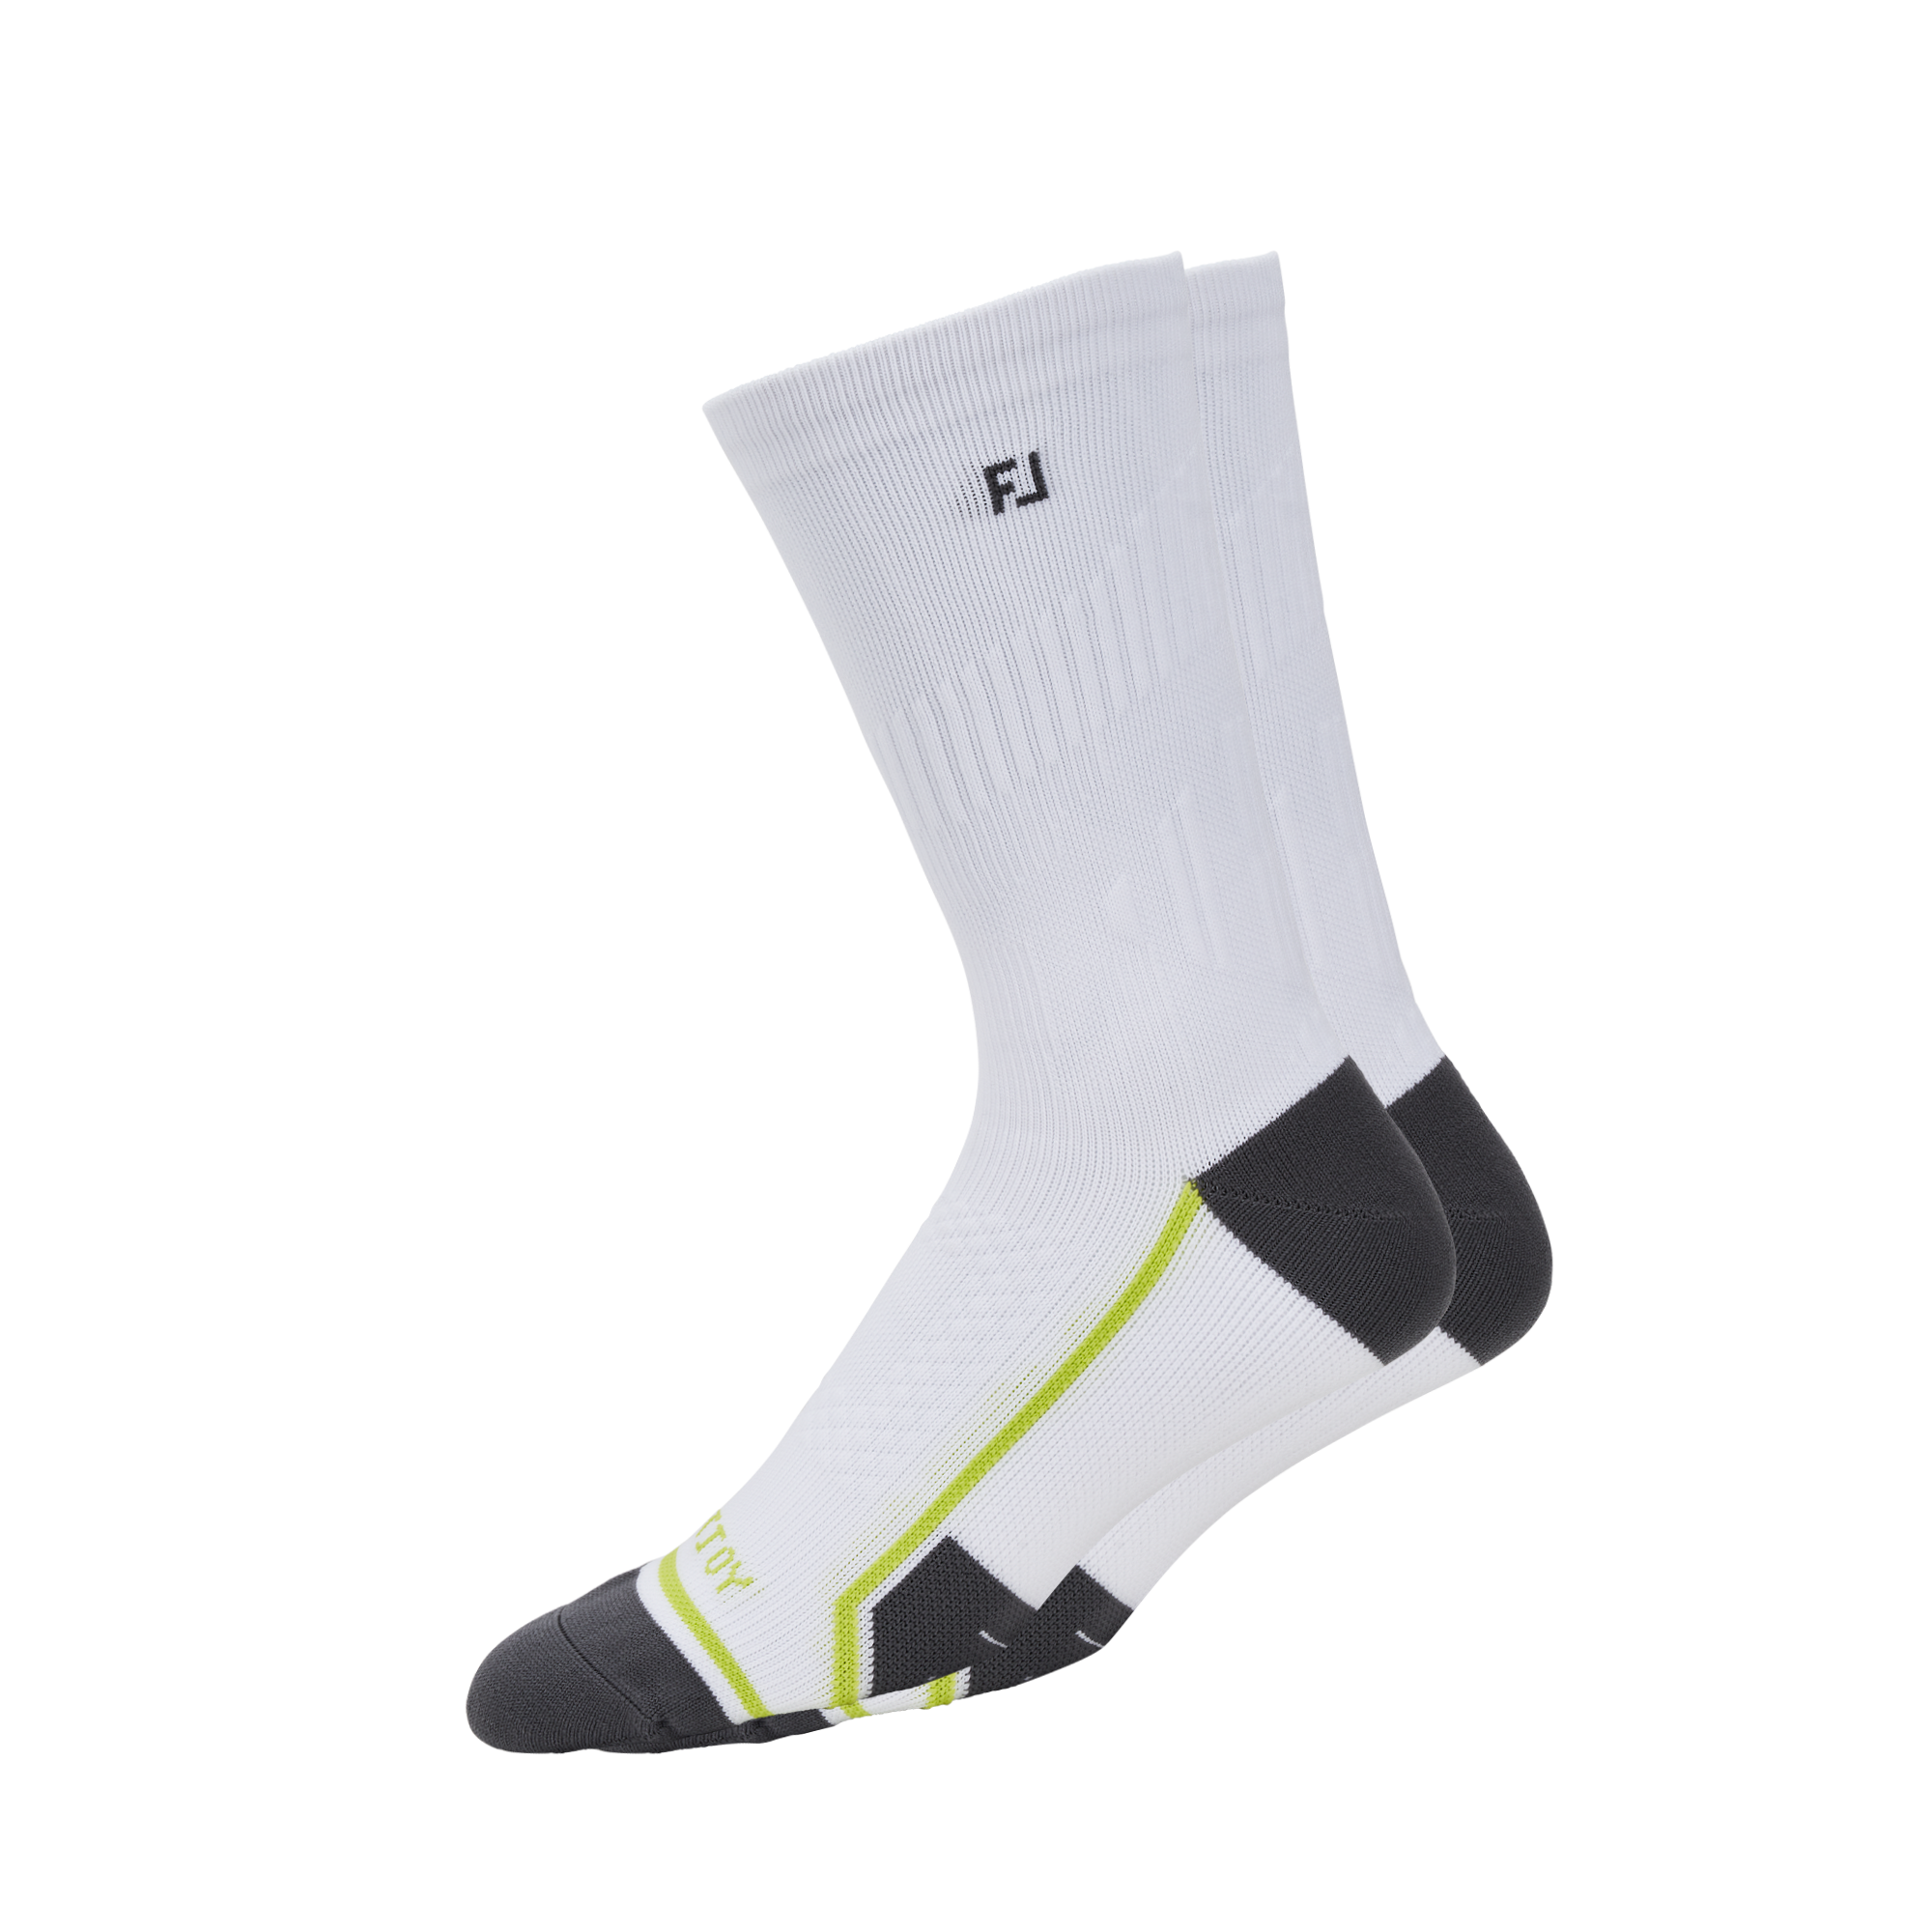 Under Armour Men's Elevated Performance No Show Tab Golf Socks